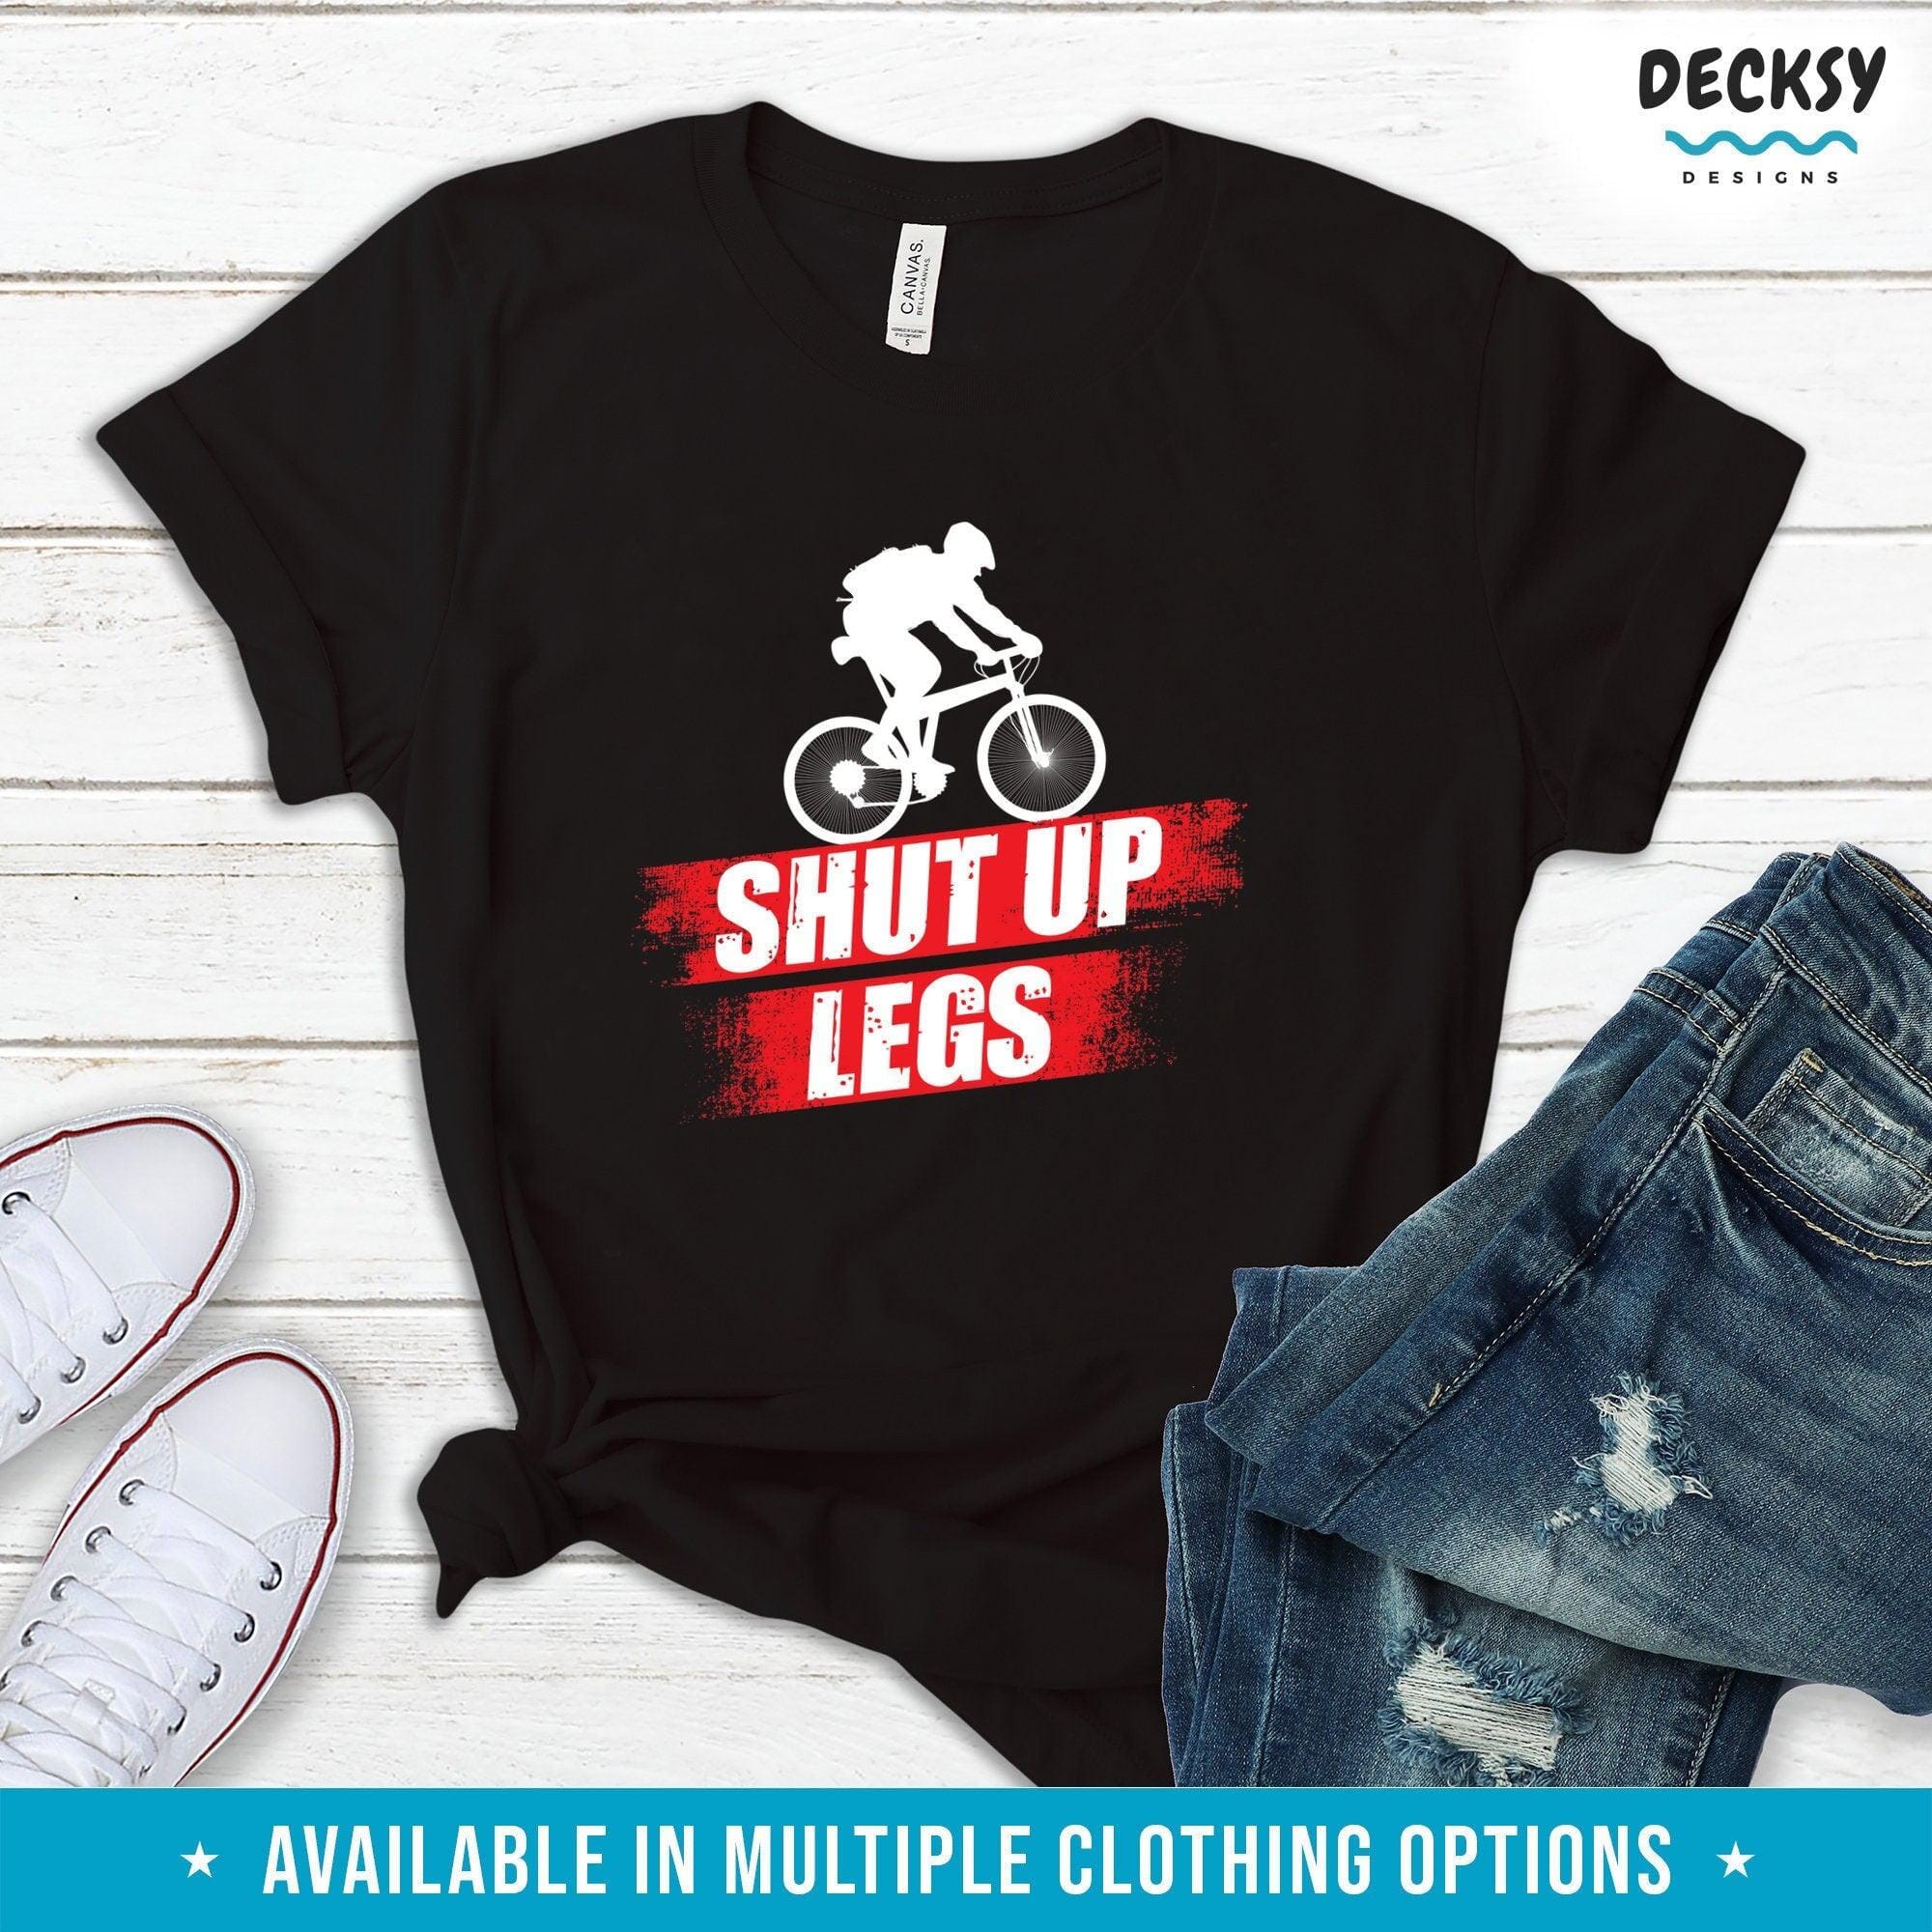 Mountain Bike Tshirt, Gift For Cyclists-Clothing:Gender-Neutral Adult Clothing:Tops & Tees:T-shirts:Graphic Tees-DecksyDesigns